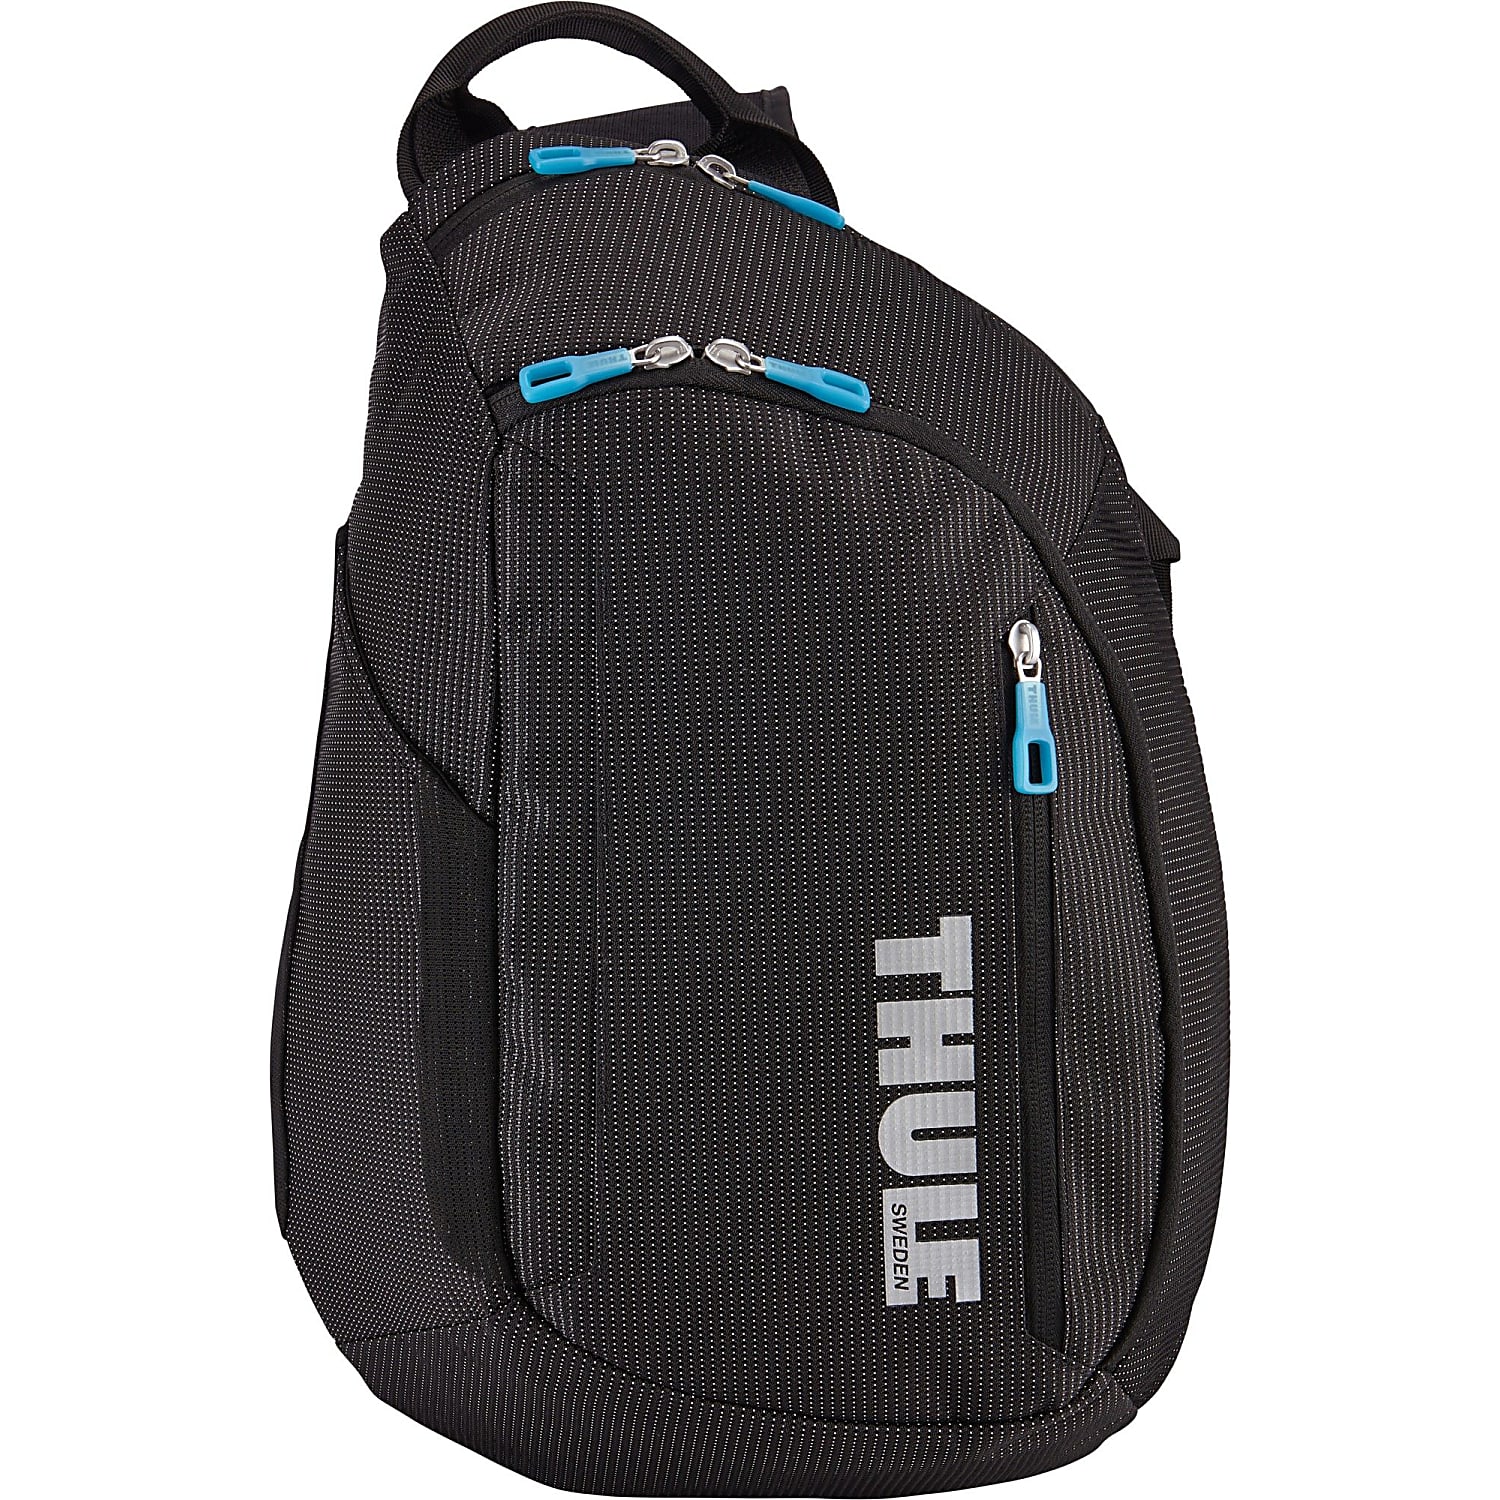 Thule CROSSOVER SLING PACK 17L, Black - Fast and cheap - www.exxpozed.com